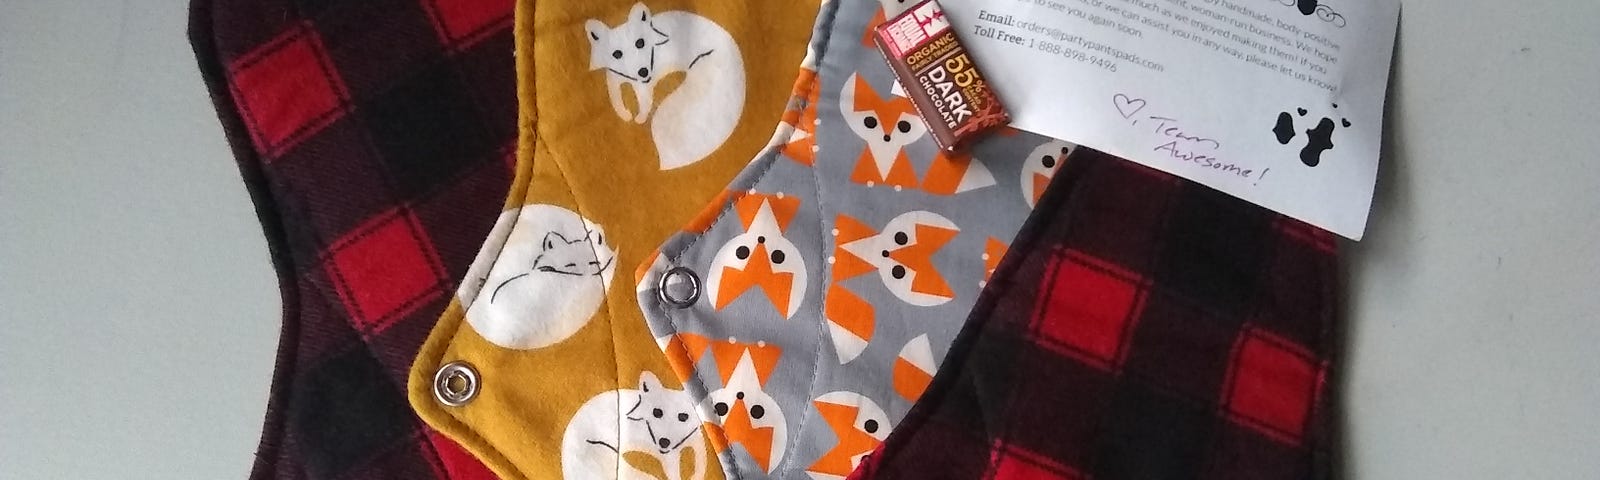 Four cloth menstrual pads. Two of them are red and black plaid, one of them has white foxes on a gold background, and one has orange and white foxes on a grey background.